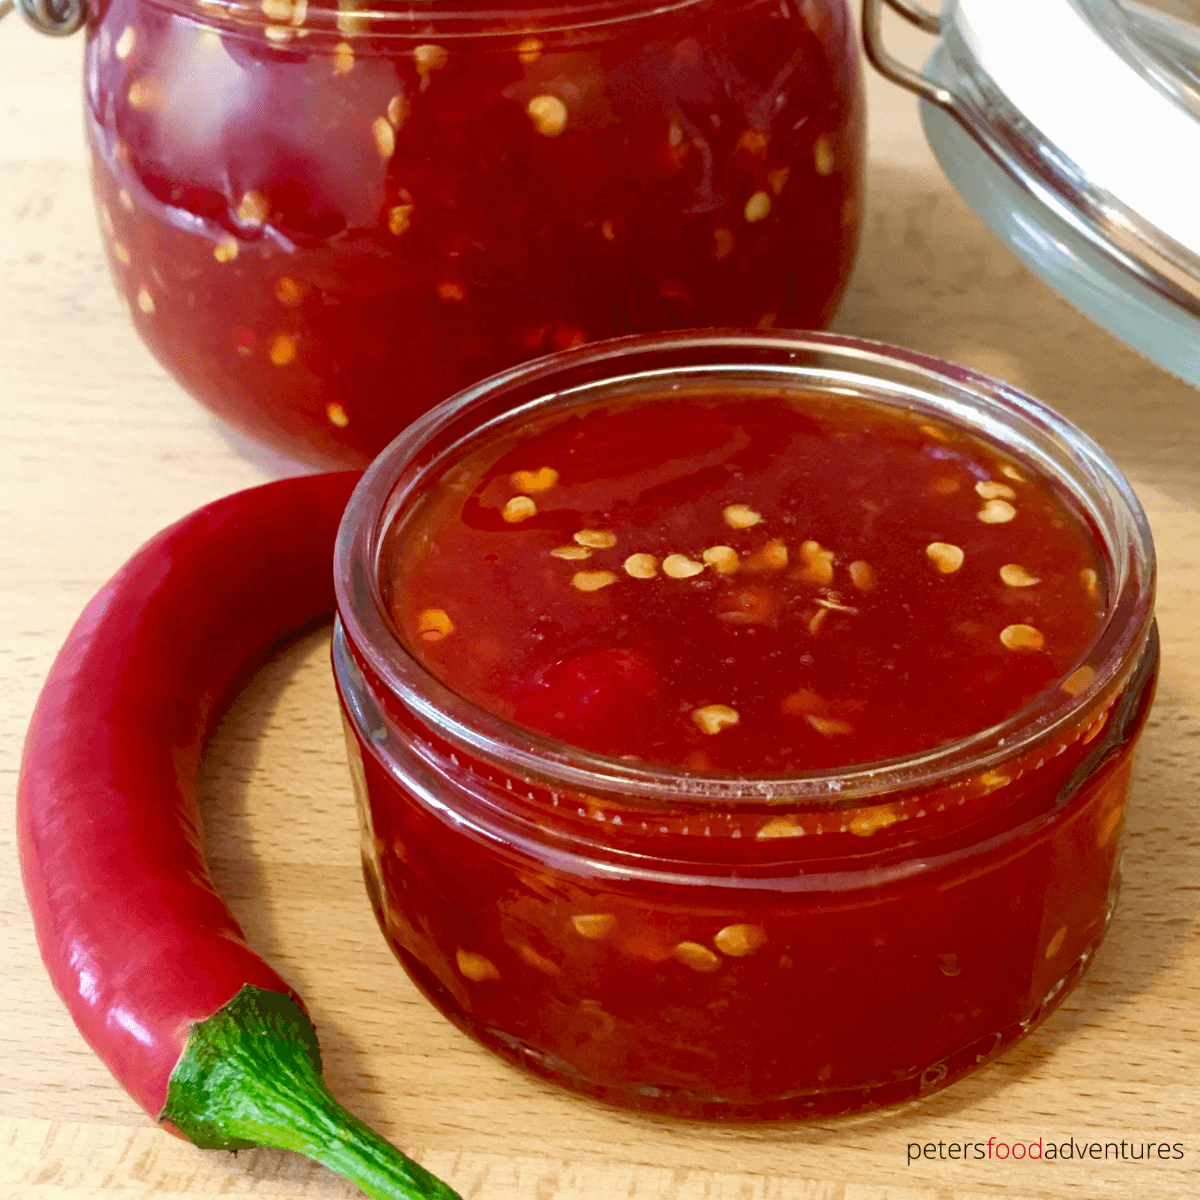 This Homemade Thai Sweet Chili Sauce has so much flavor with red chilis, garlic and ginger. An exotic sauce that's sweet and spicy, a perfect dipping sauce, marinade and flavor booster! Known as name chim (น้ำจิ้มไก่) which means dipping sauce for chicken